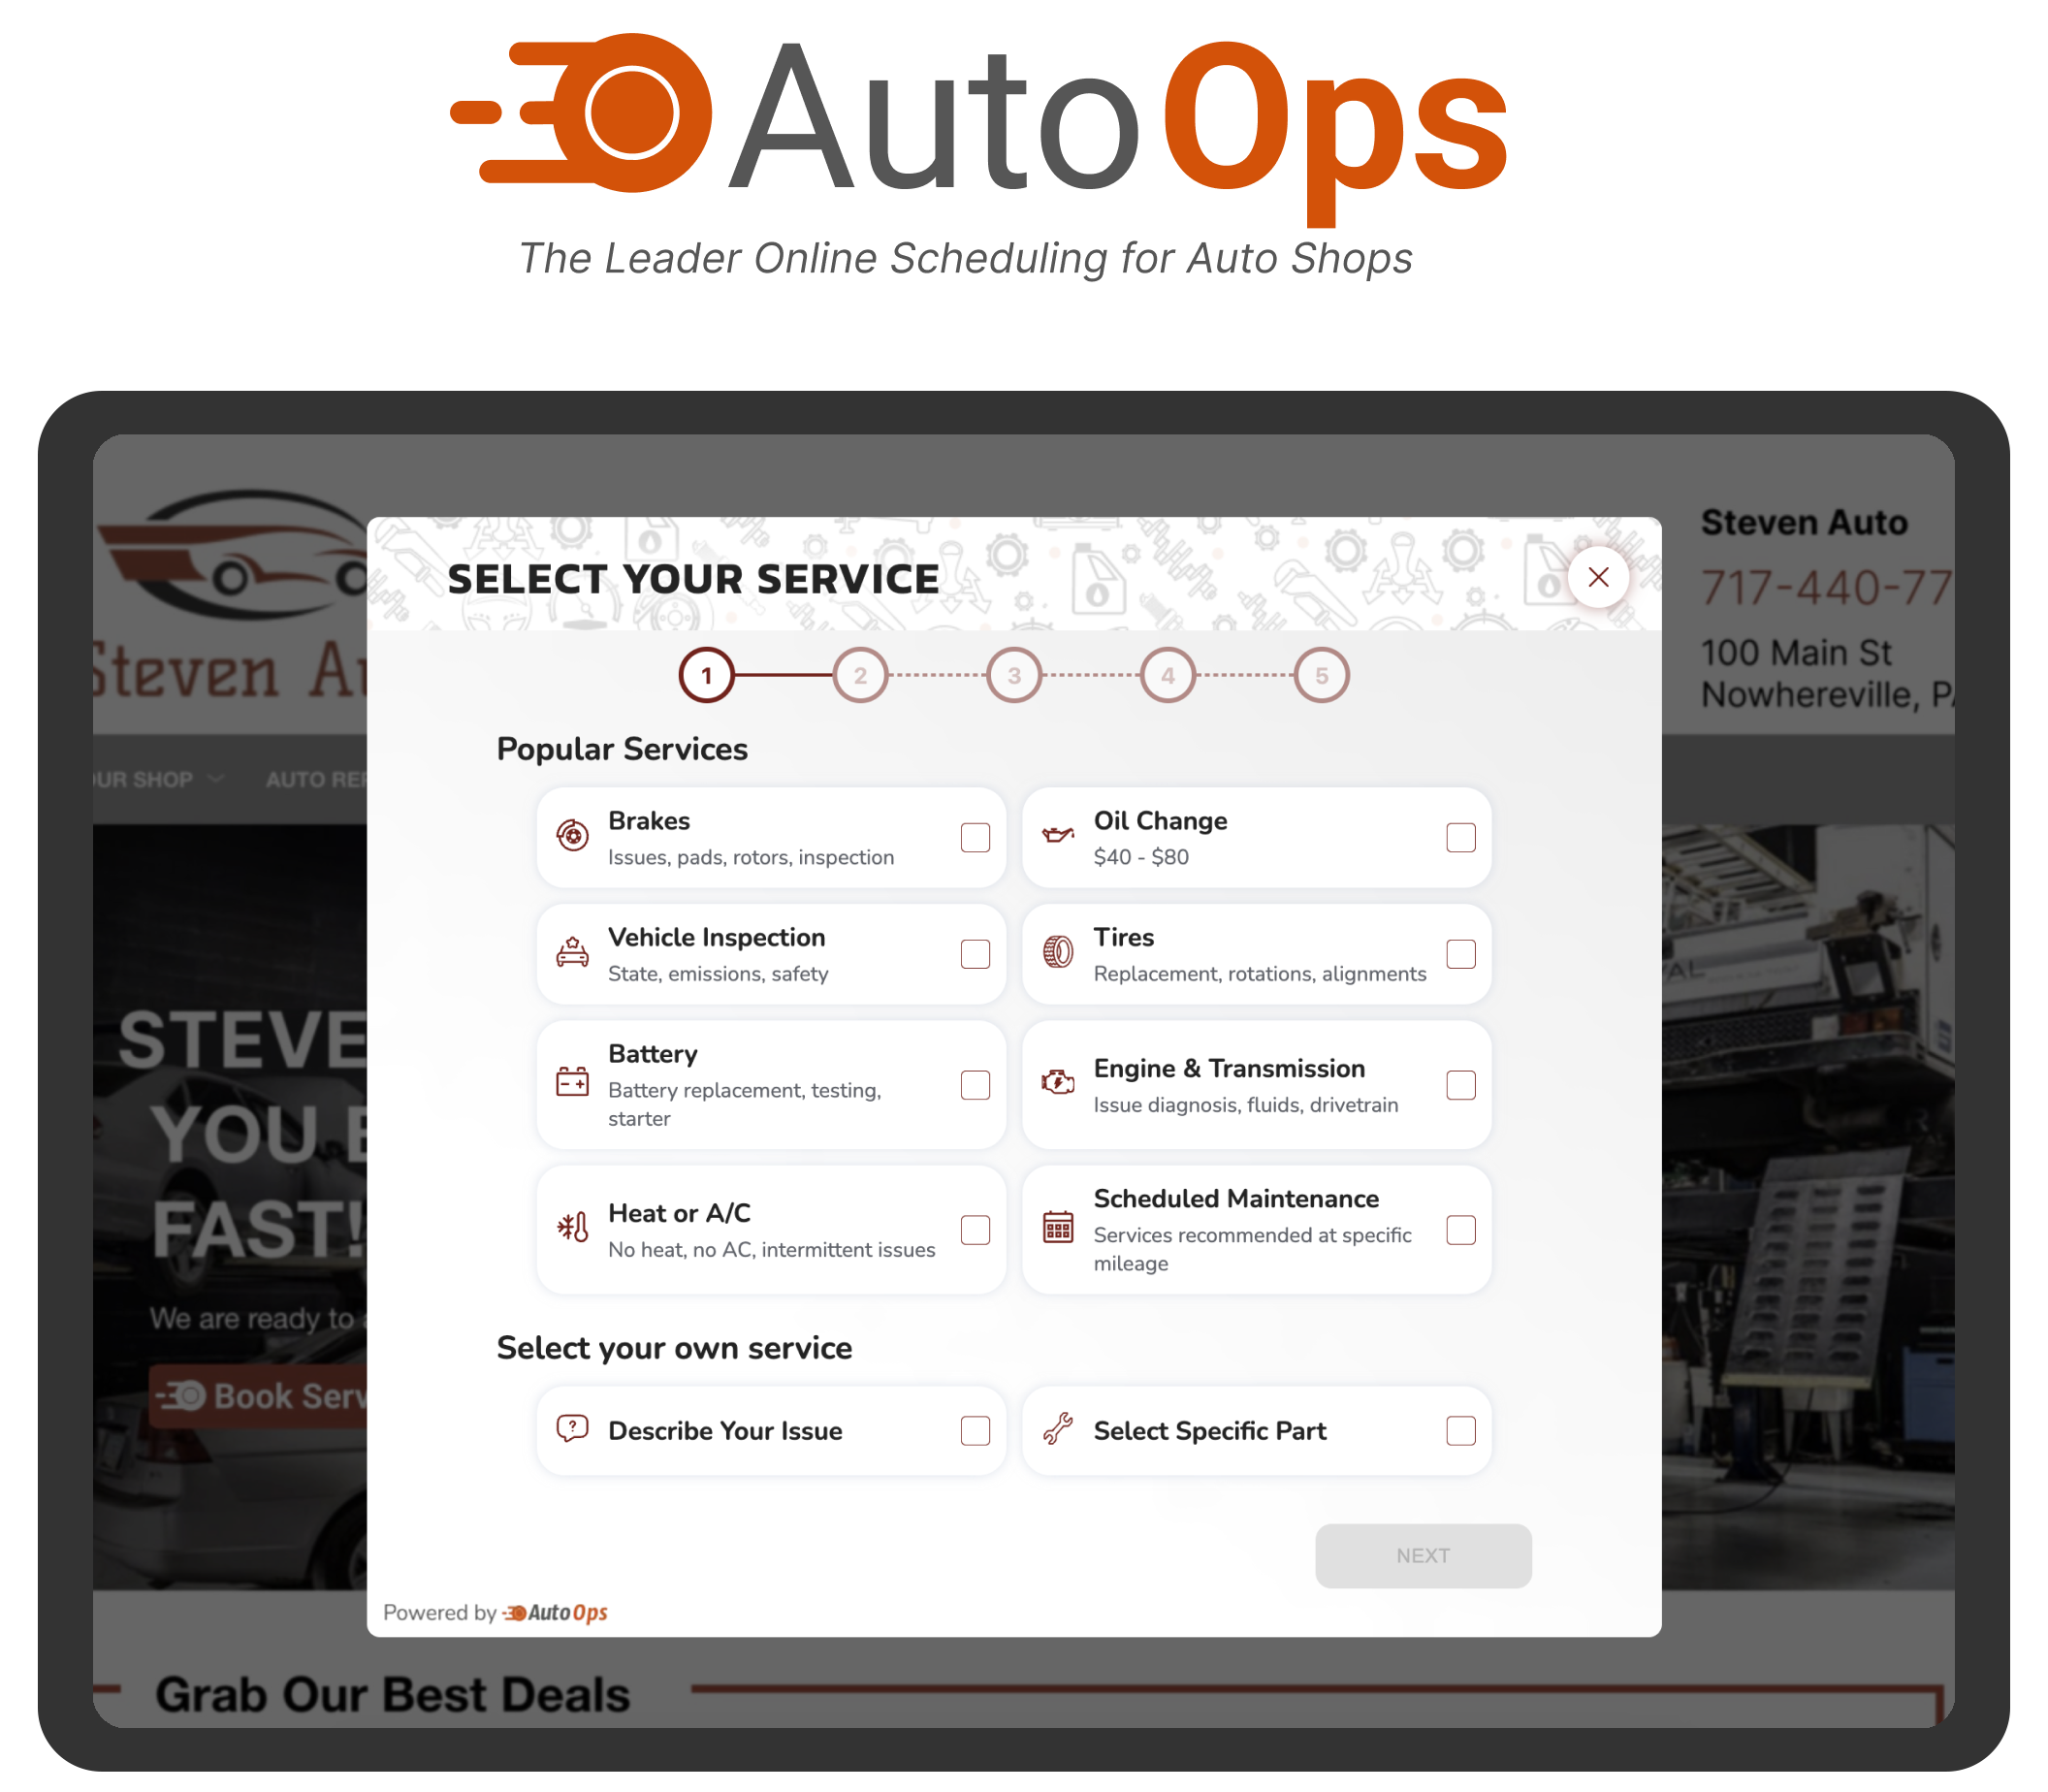 AutoOps: integrated online scheduling tool for auto repair shops